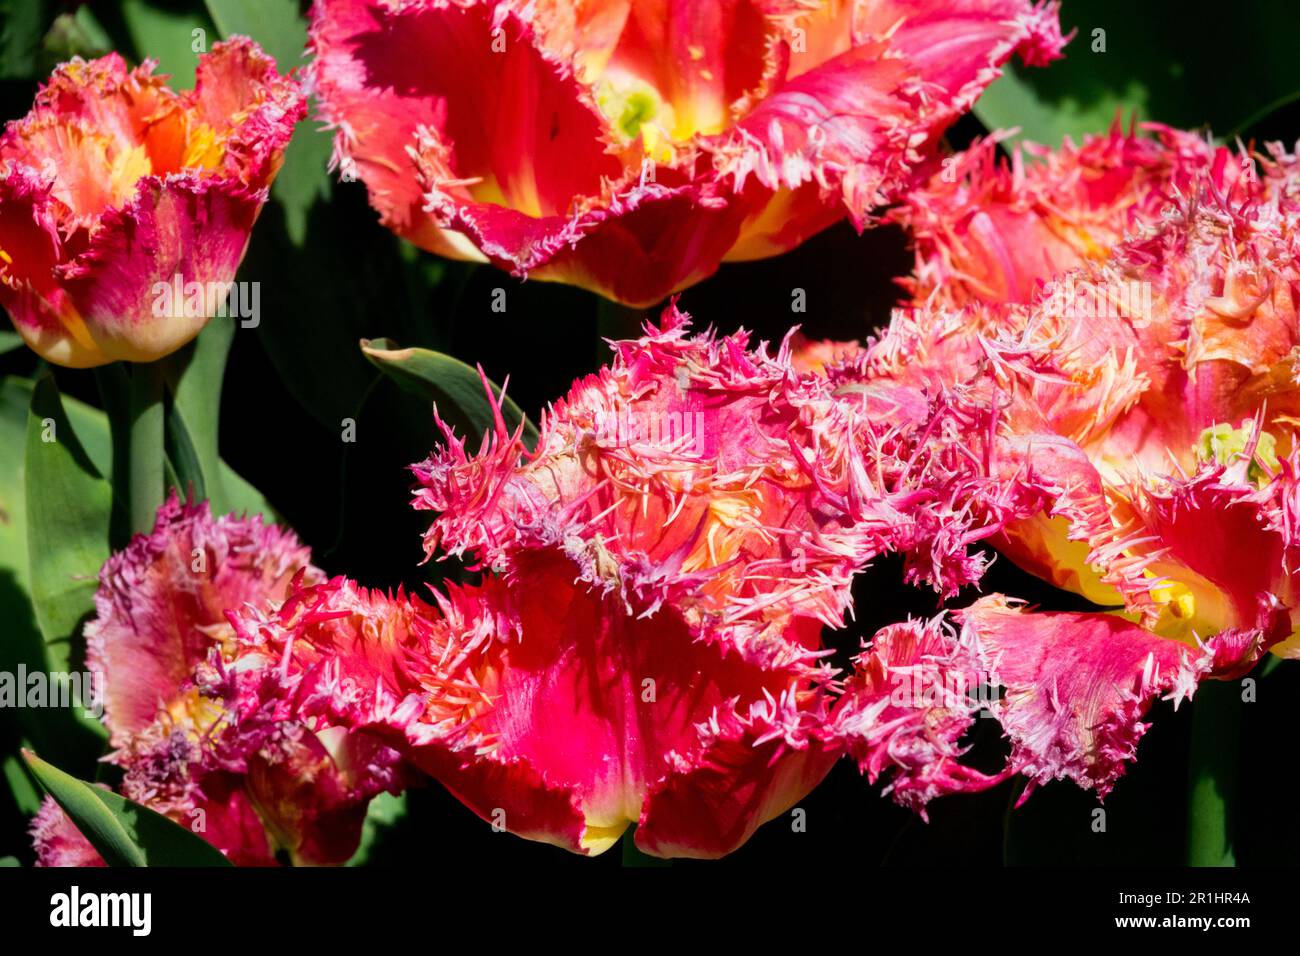 Fringed Tulip 'Joint Division' Tulipa Fringed Tulips Bright Red Stock Photo